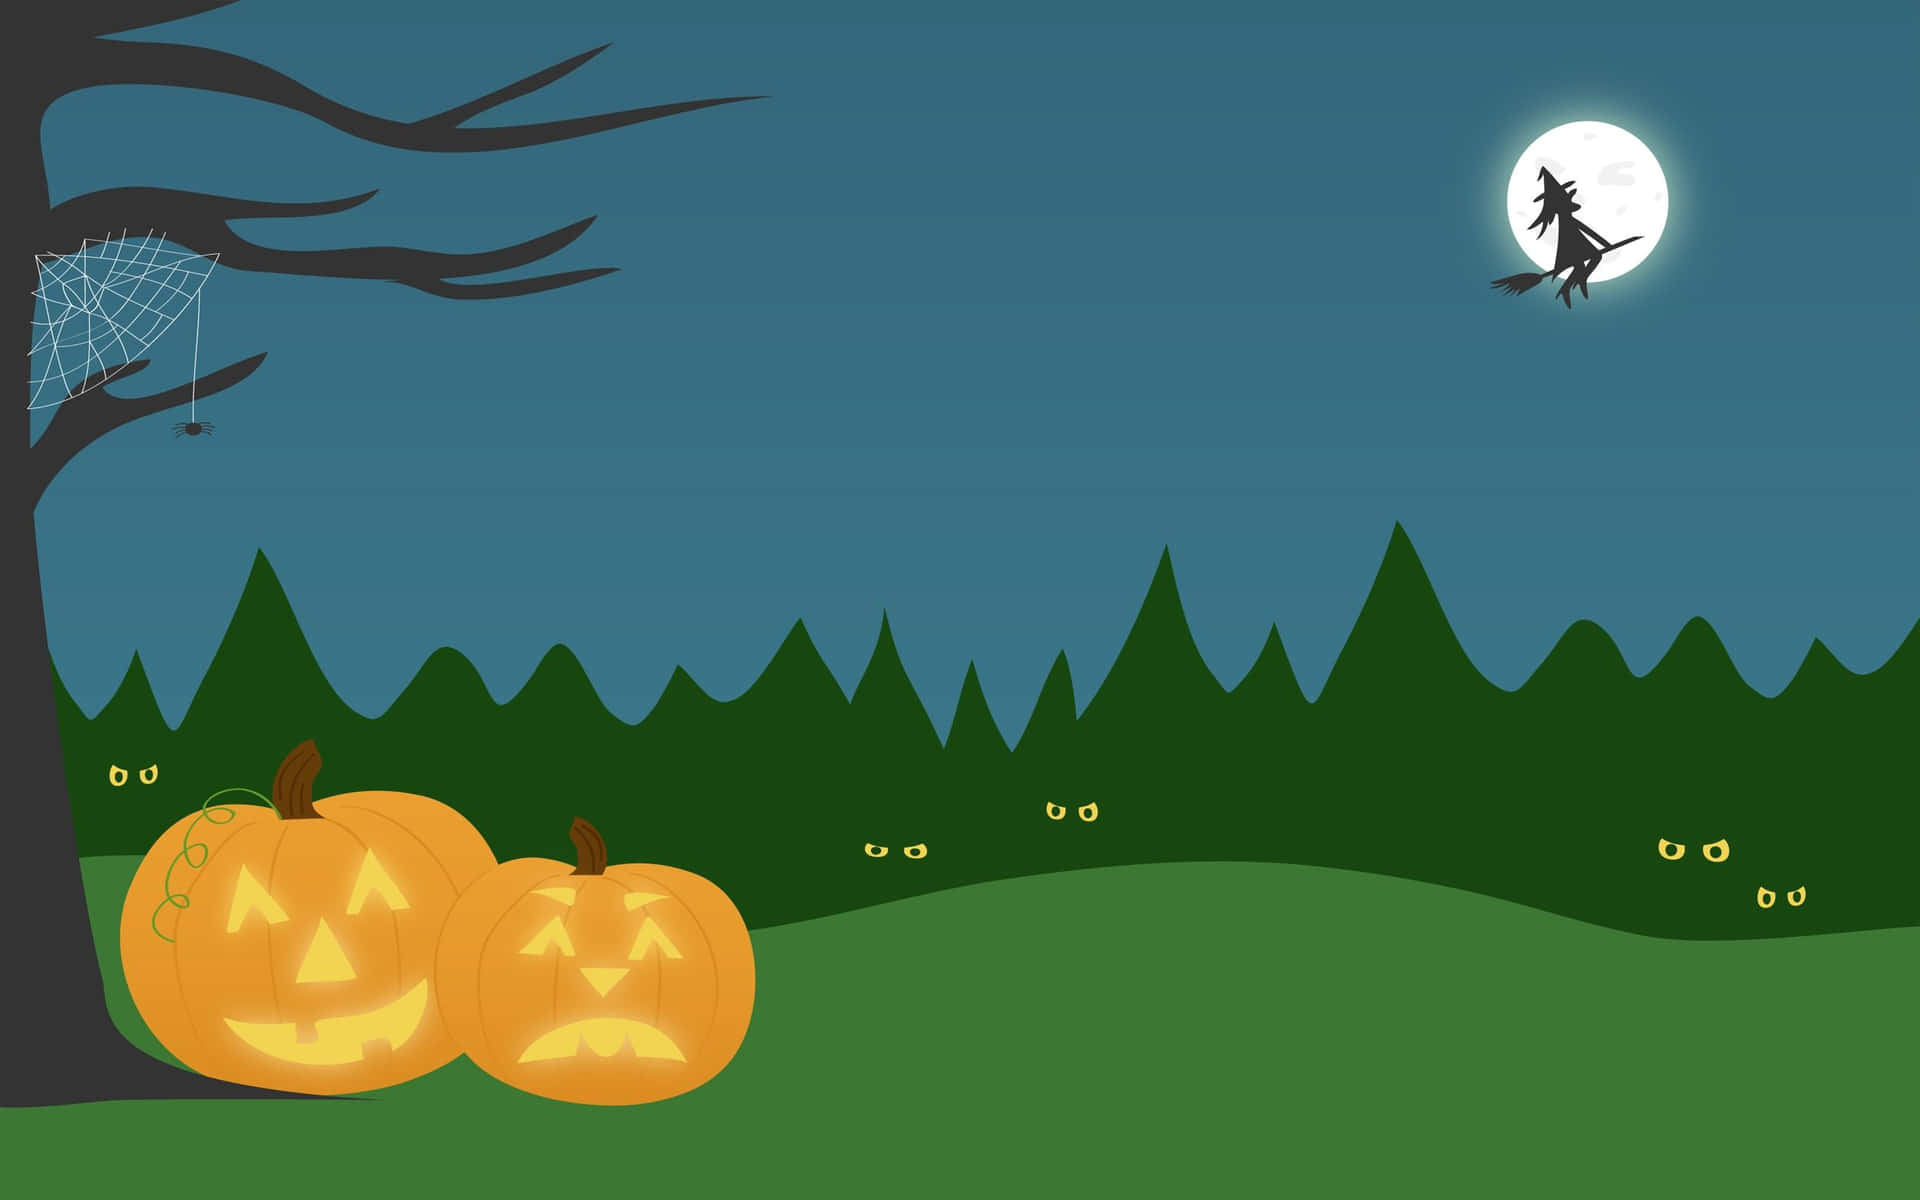 "Trick-or-Treat your way to a frightfully fun Halloween!" Wallpaper